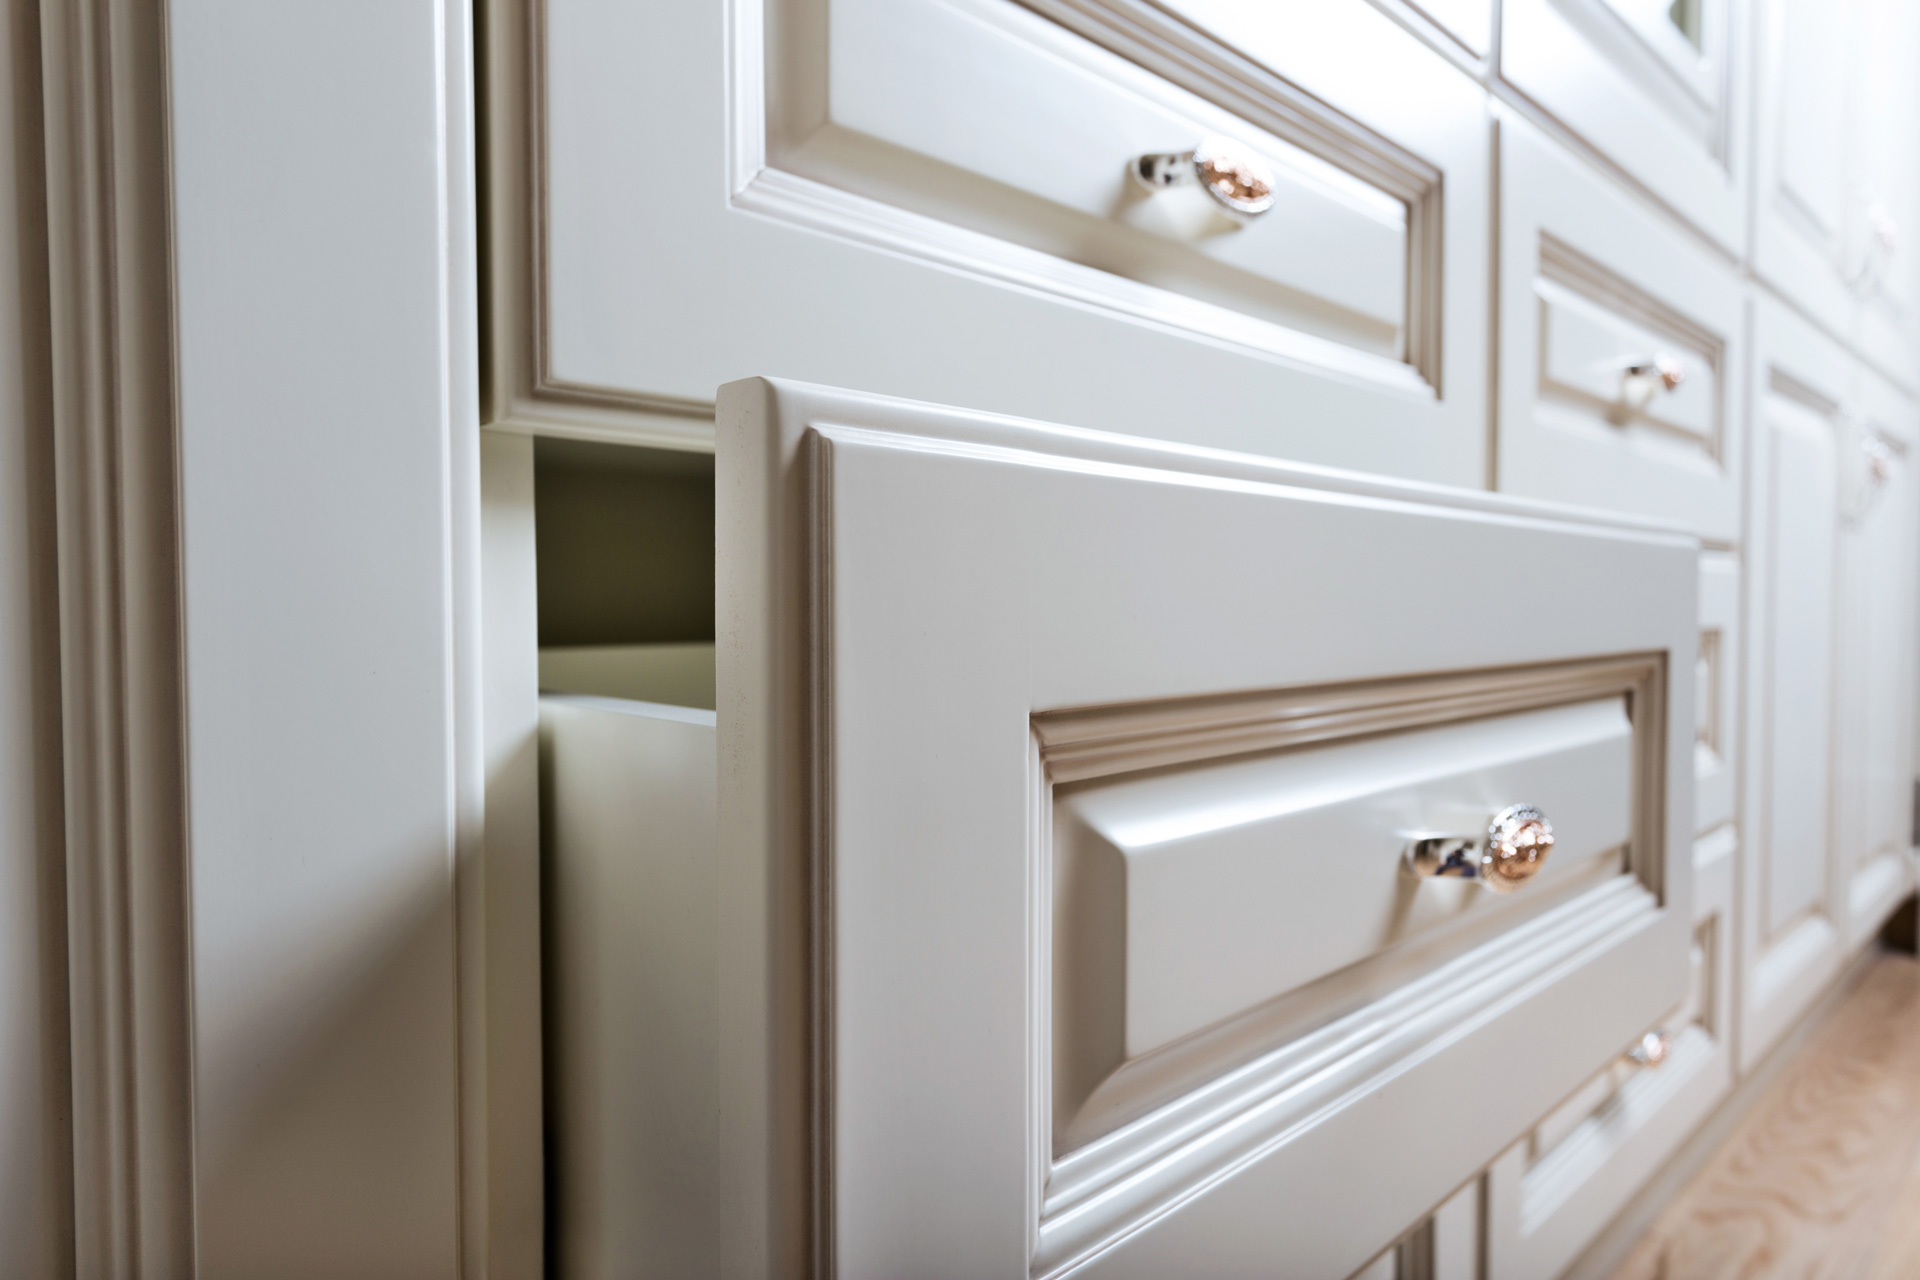 Which is Better Medallion vs Schrock Cabinets?